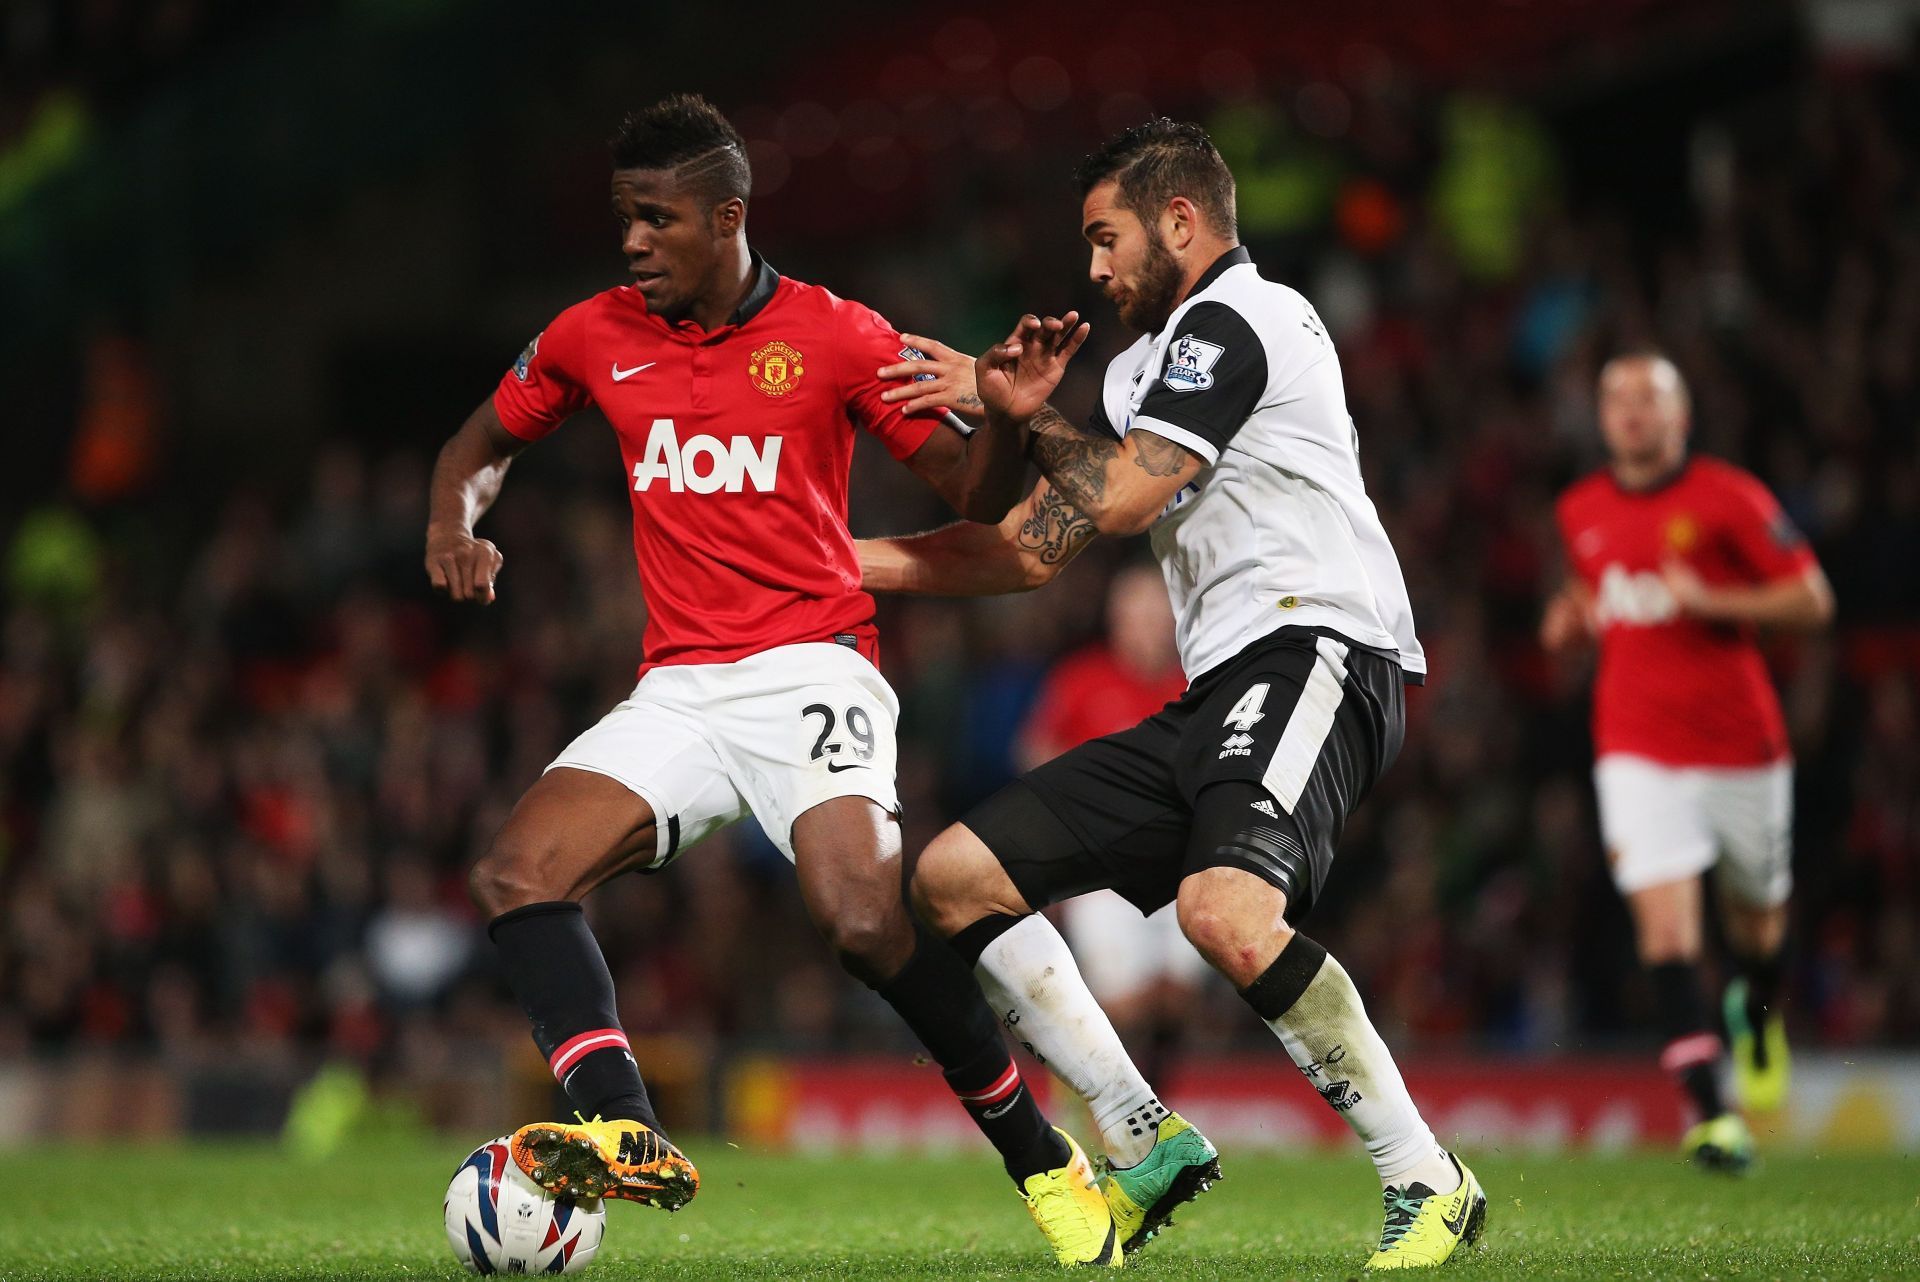 Manchester United v Norwich City - Capital One Cup Fourth Round